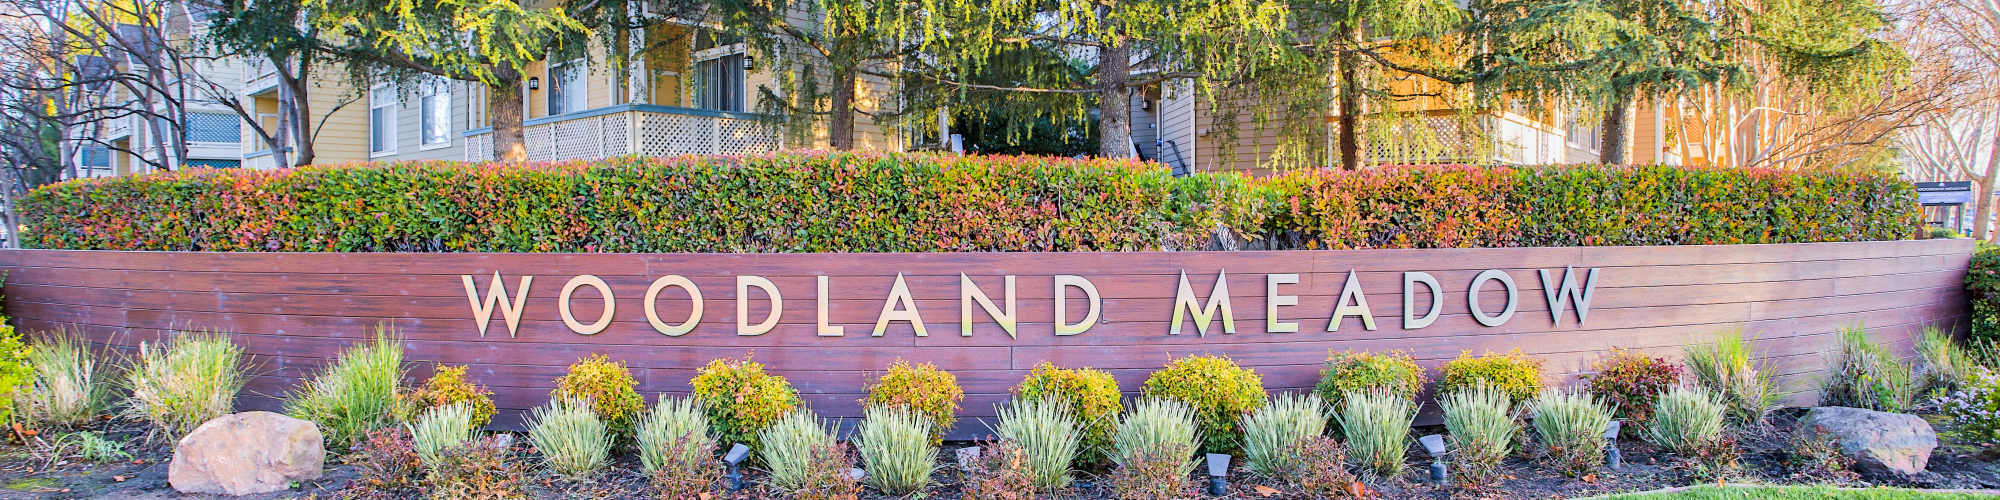 Privacy Policy | Woodland Meadow in San Jose, California